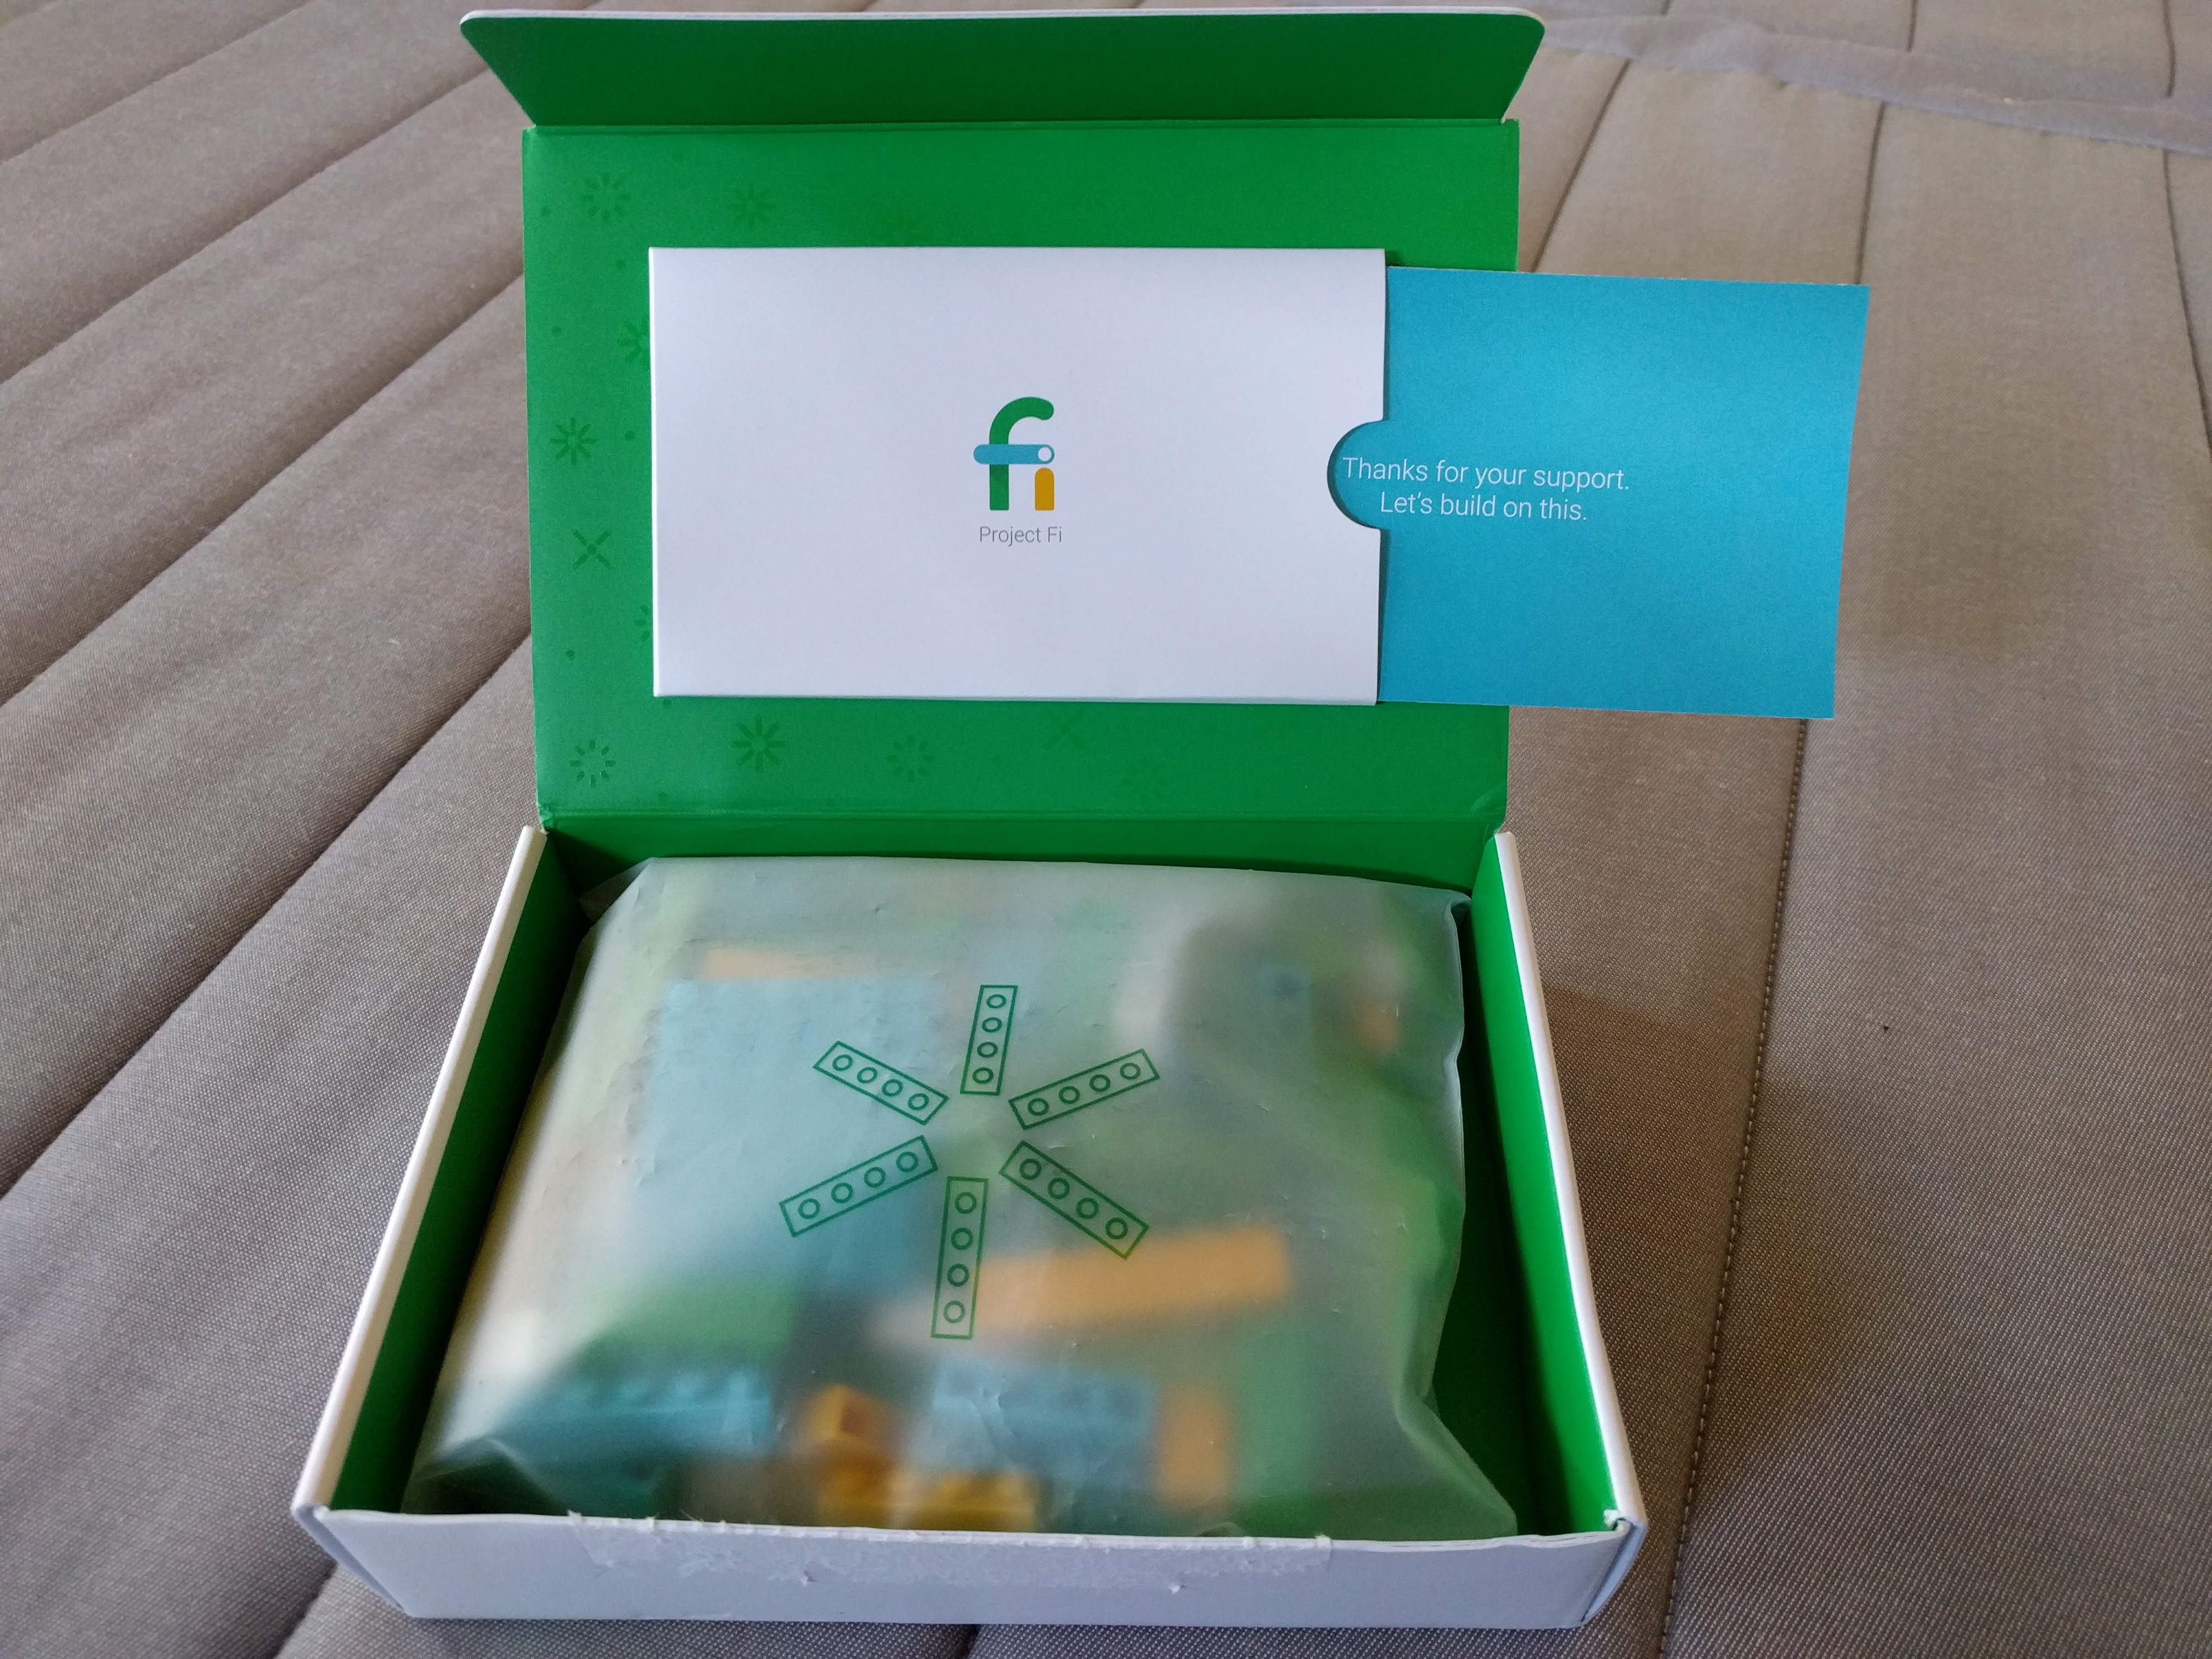 Aww, thanks for the Project Fi Lego set, Google.